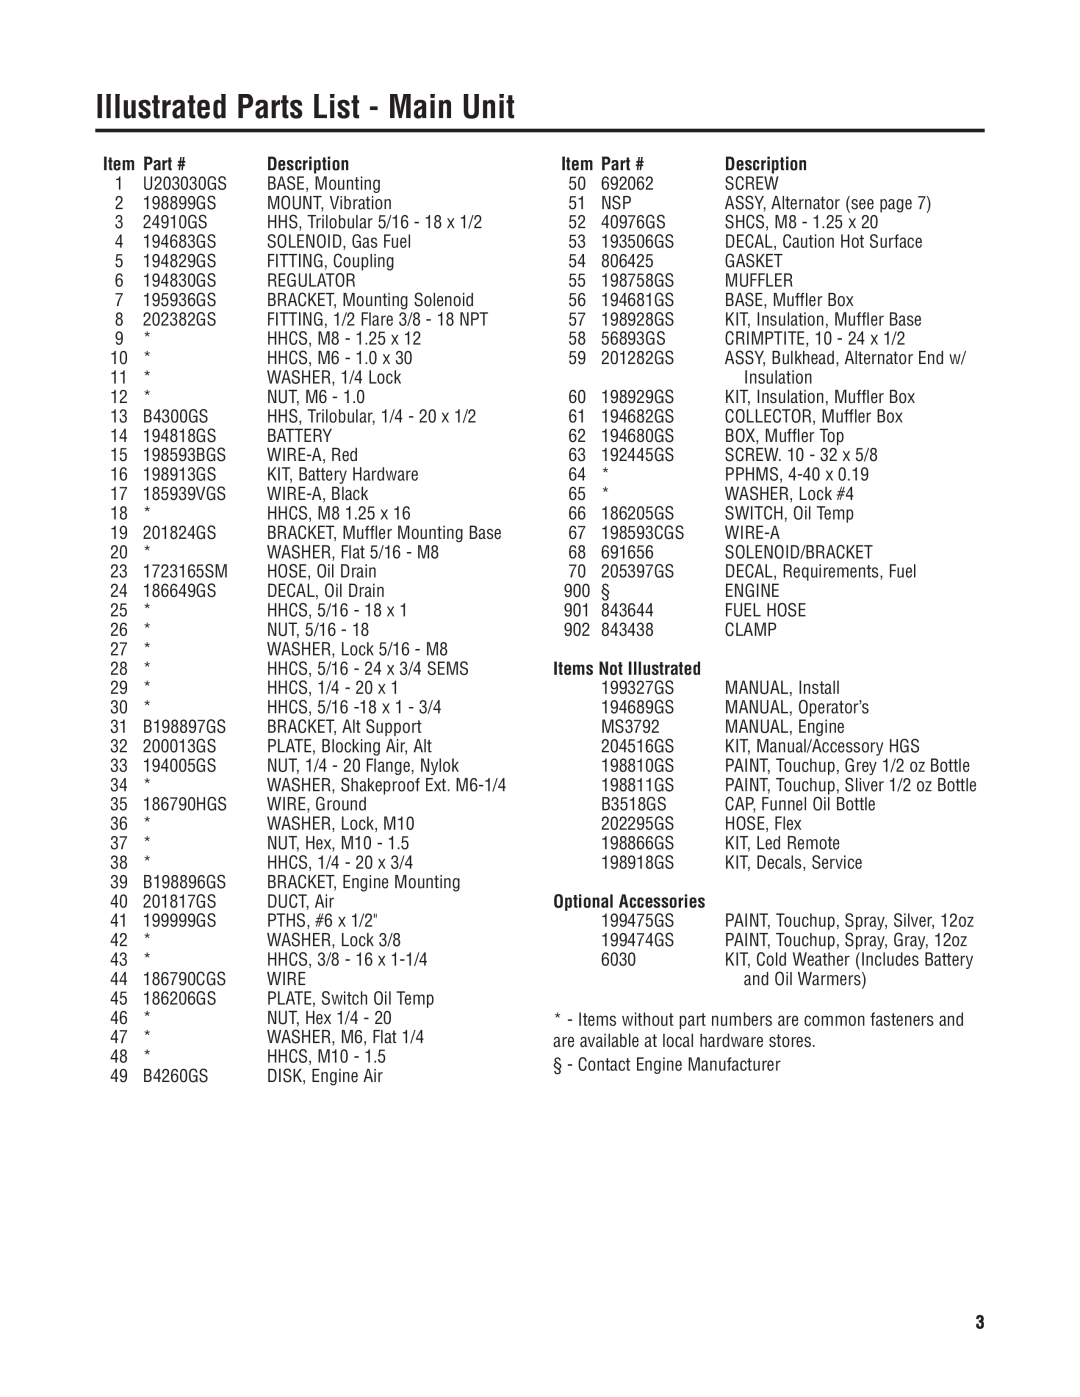 Briggs & Stratton 040229-2 manual Illustrated Parts List - Main Unit, Part #, Description, Items Not Illustrated 